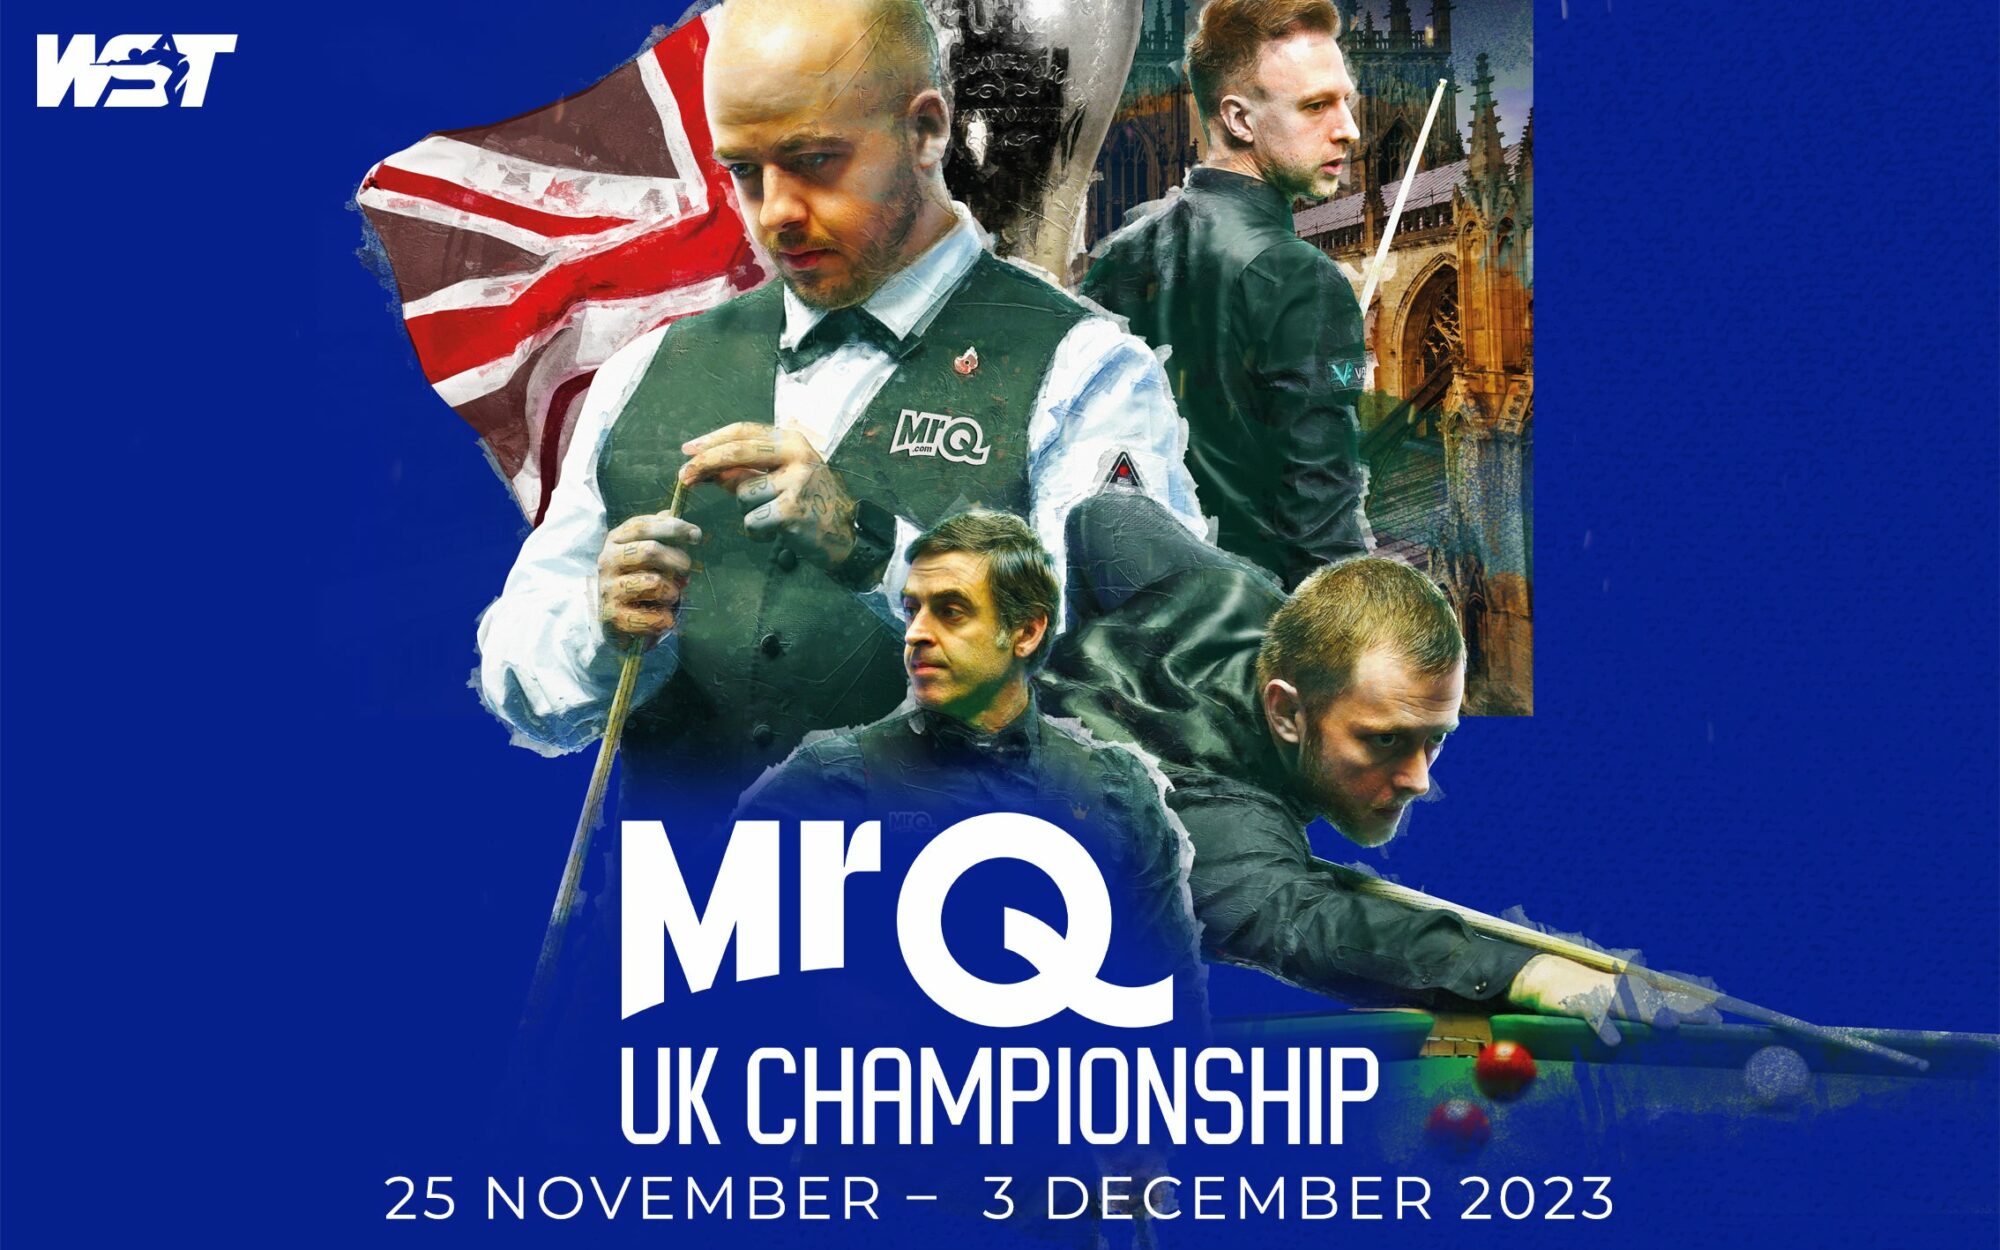 Image name MrQ UK Championship Snooker Evening at York Barbican York 1 the 2 image from the post MrQ UK Championship Snooker - Evening at York Barbican, York in Yorkshire.com.